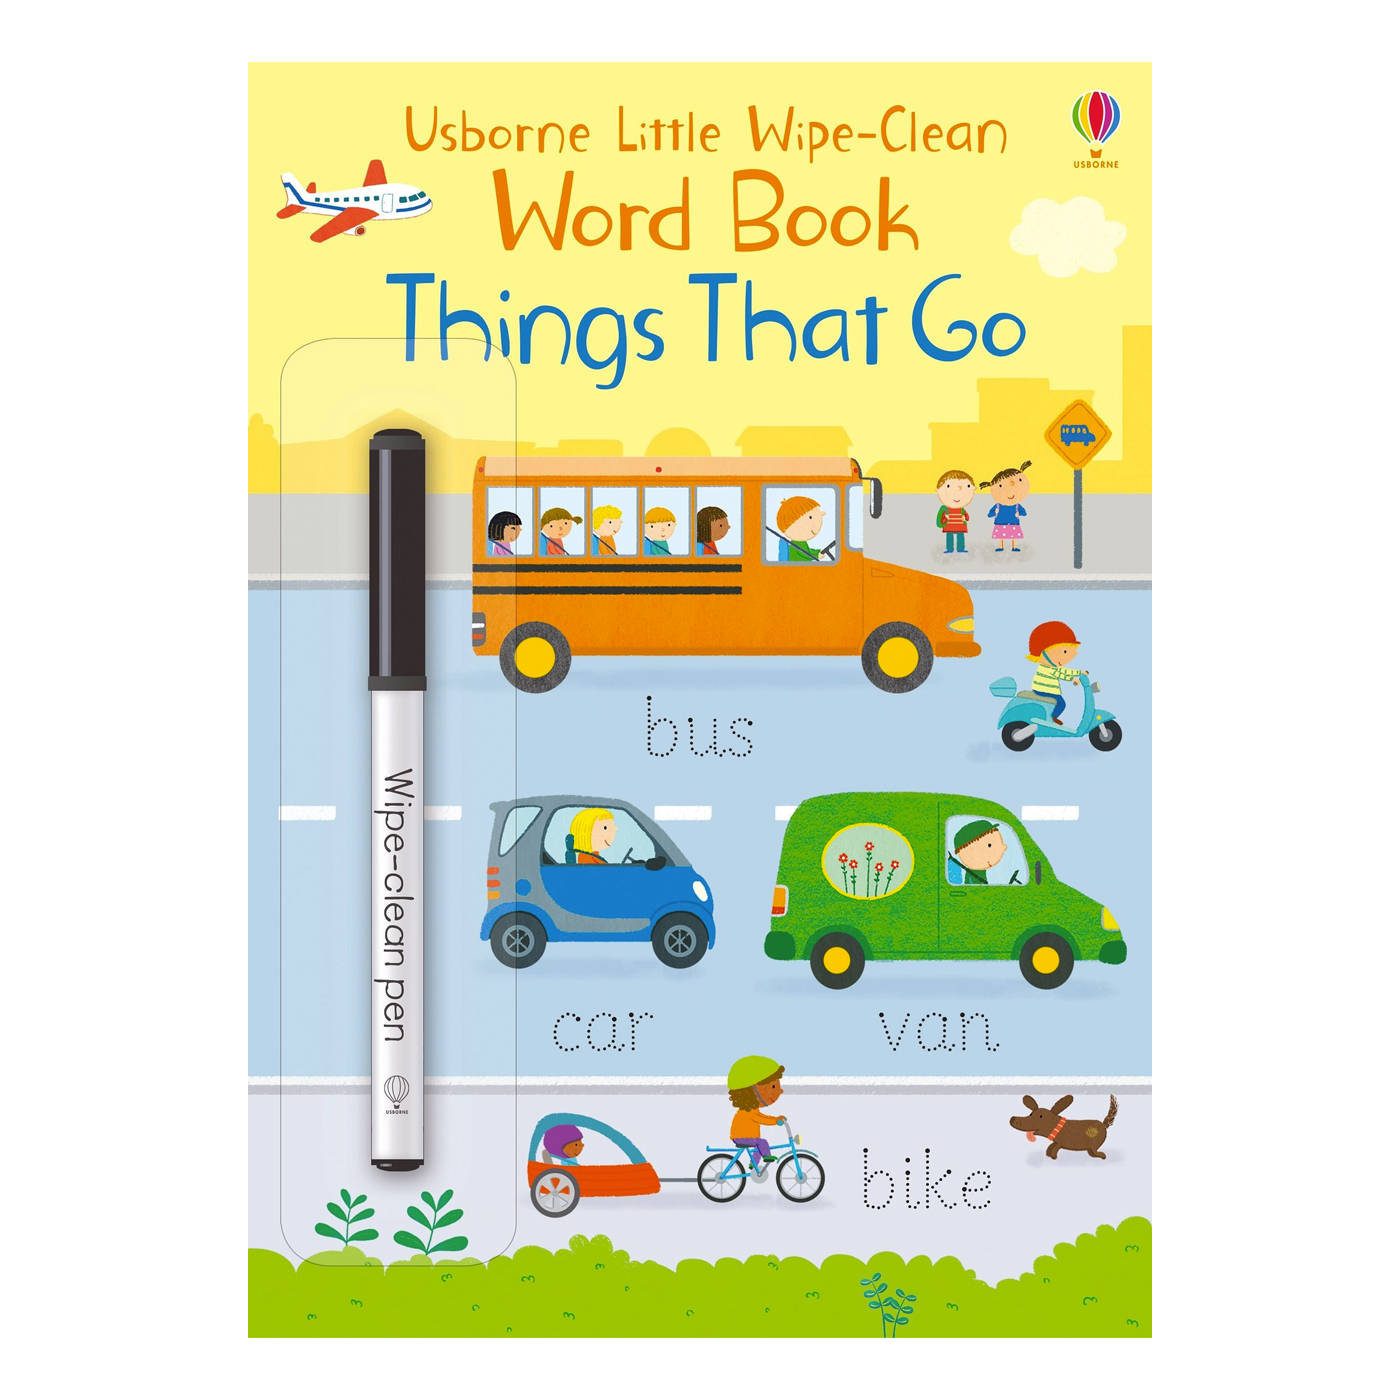  Little Wipe-Clean Word Book Things That Go